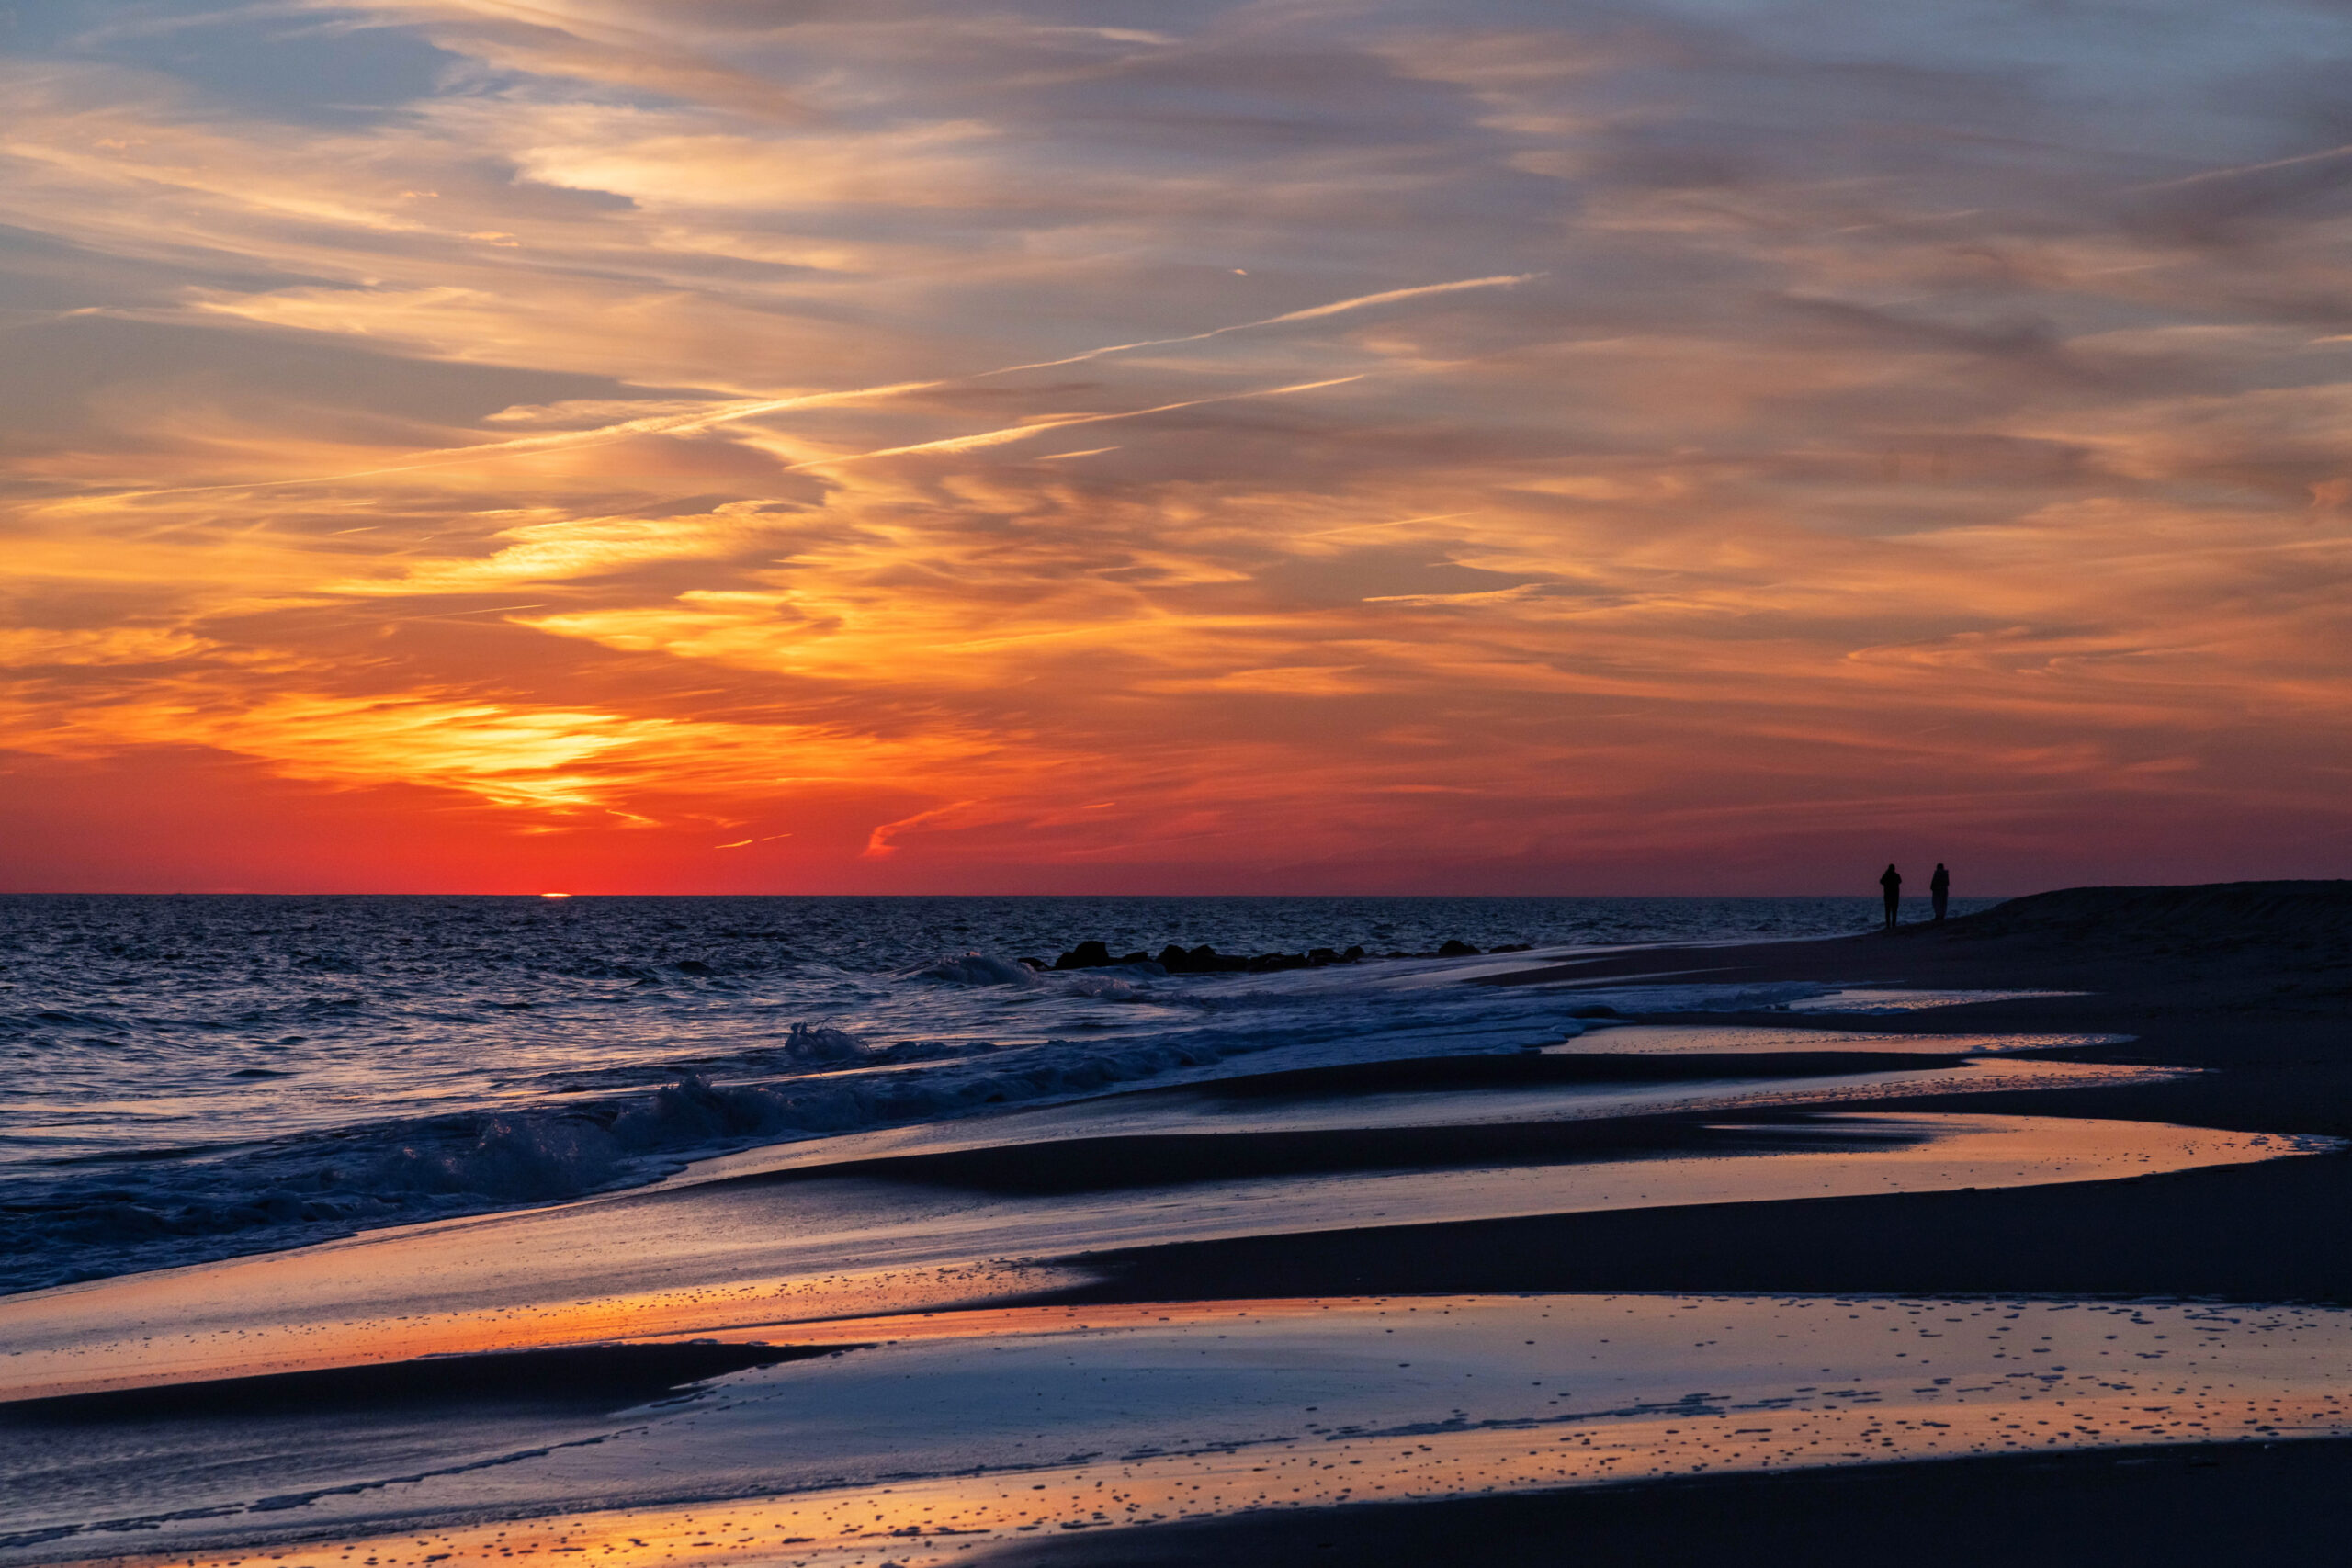 Two people in the distance on the beach watching the sun set behind the horizon. There are thin whispy clouds in the sky. The clouds are orange and red and they are reflected in the ocean and sand.